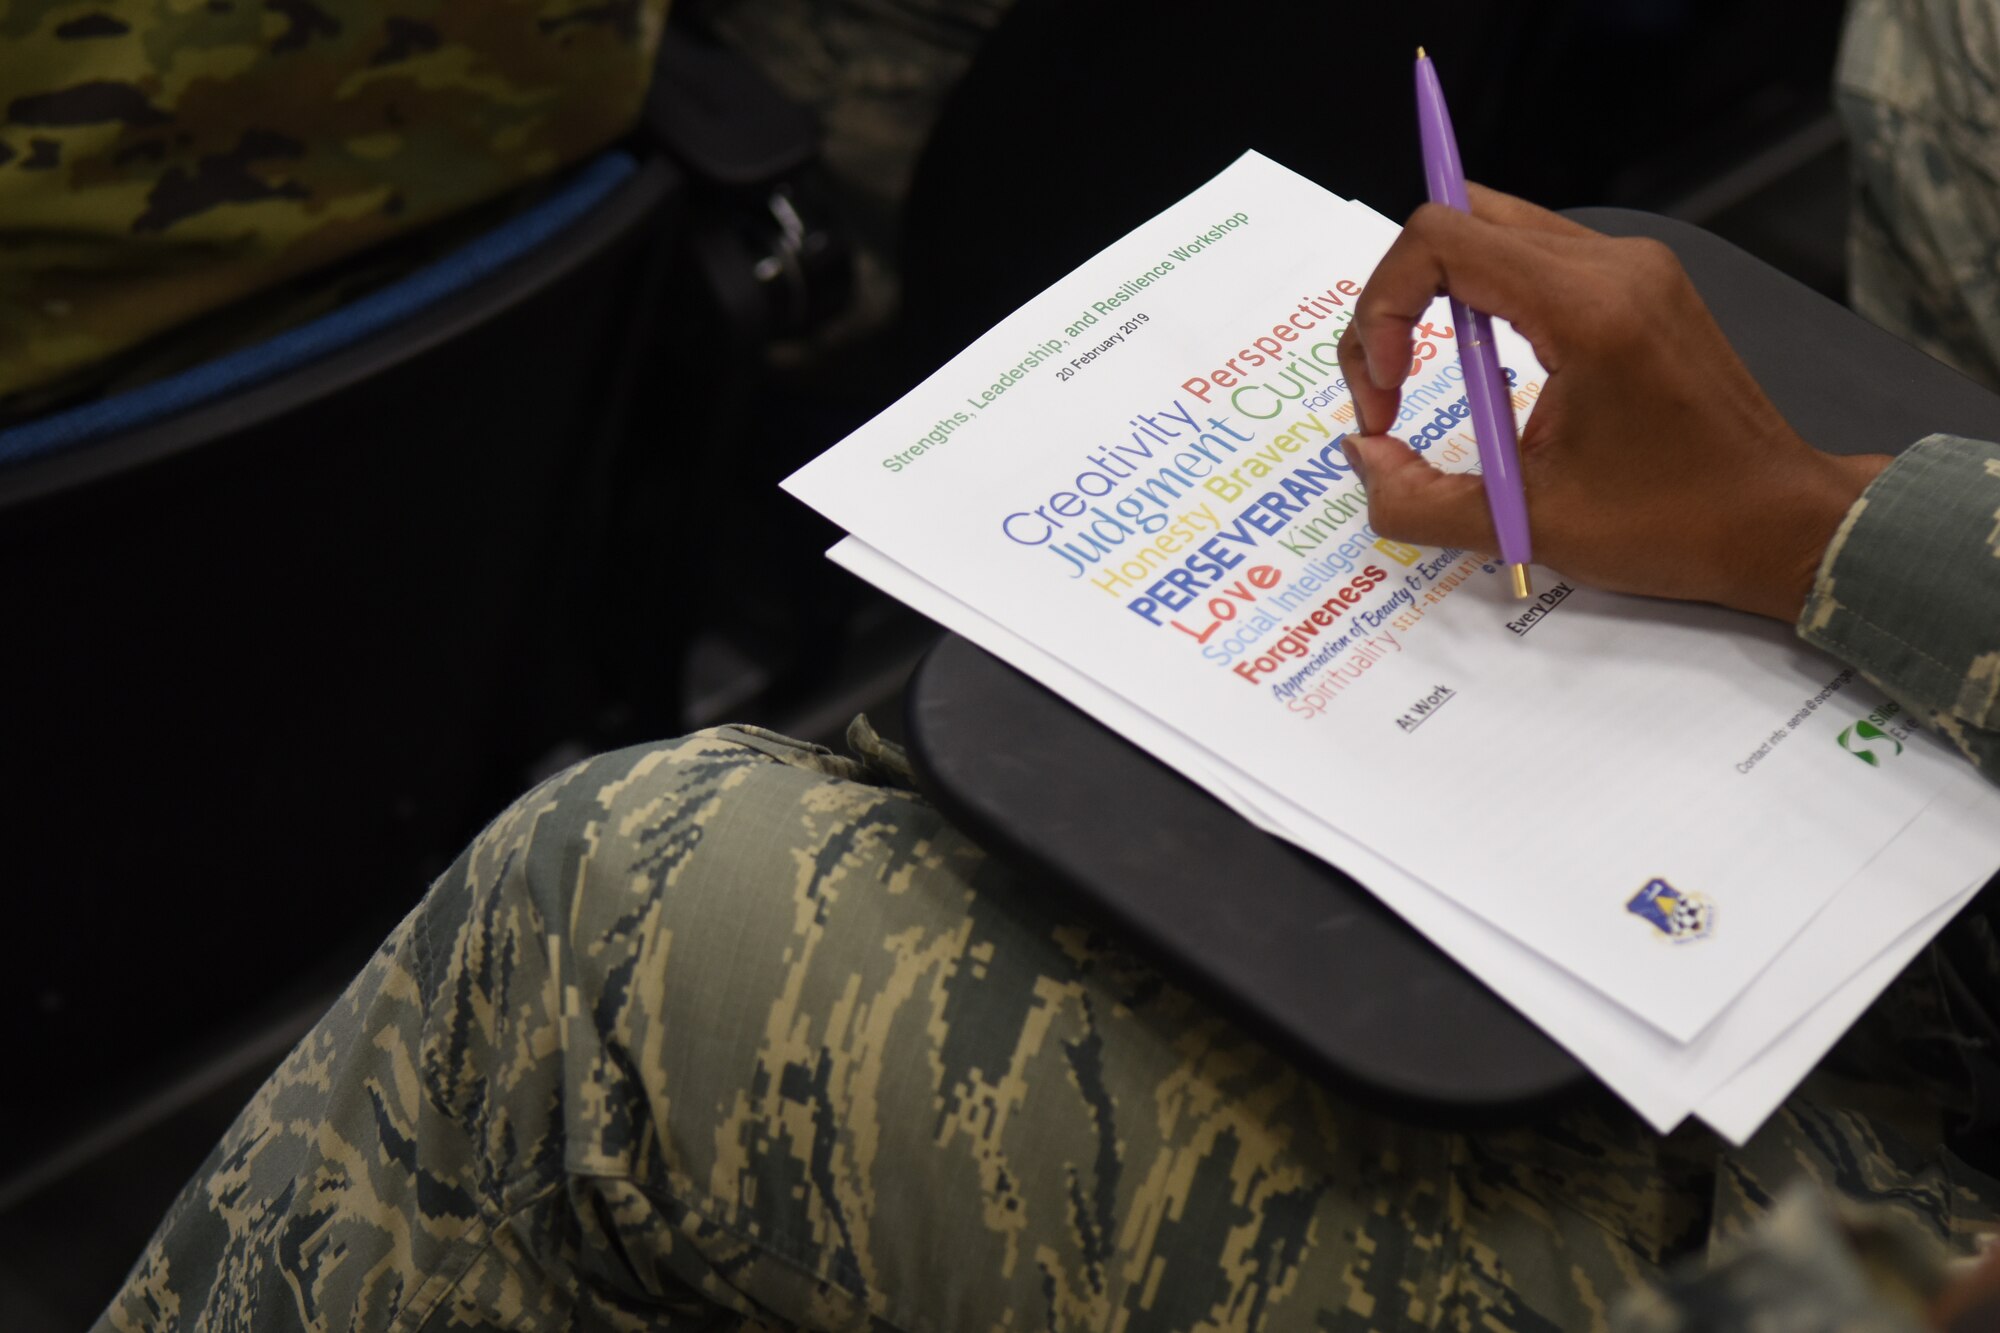 An Airman from the 9th Intelligence Squadron reviews a word cloud during the Strengths, Leadership, and Resilience Workshop